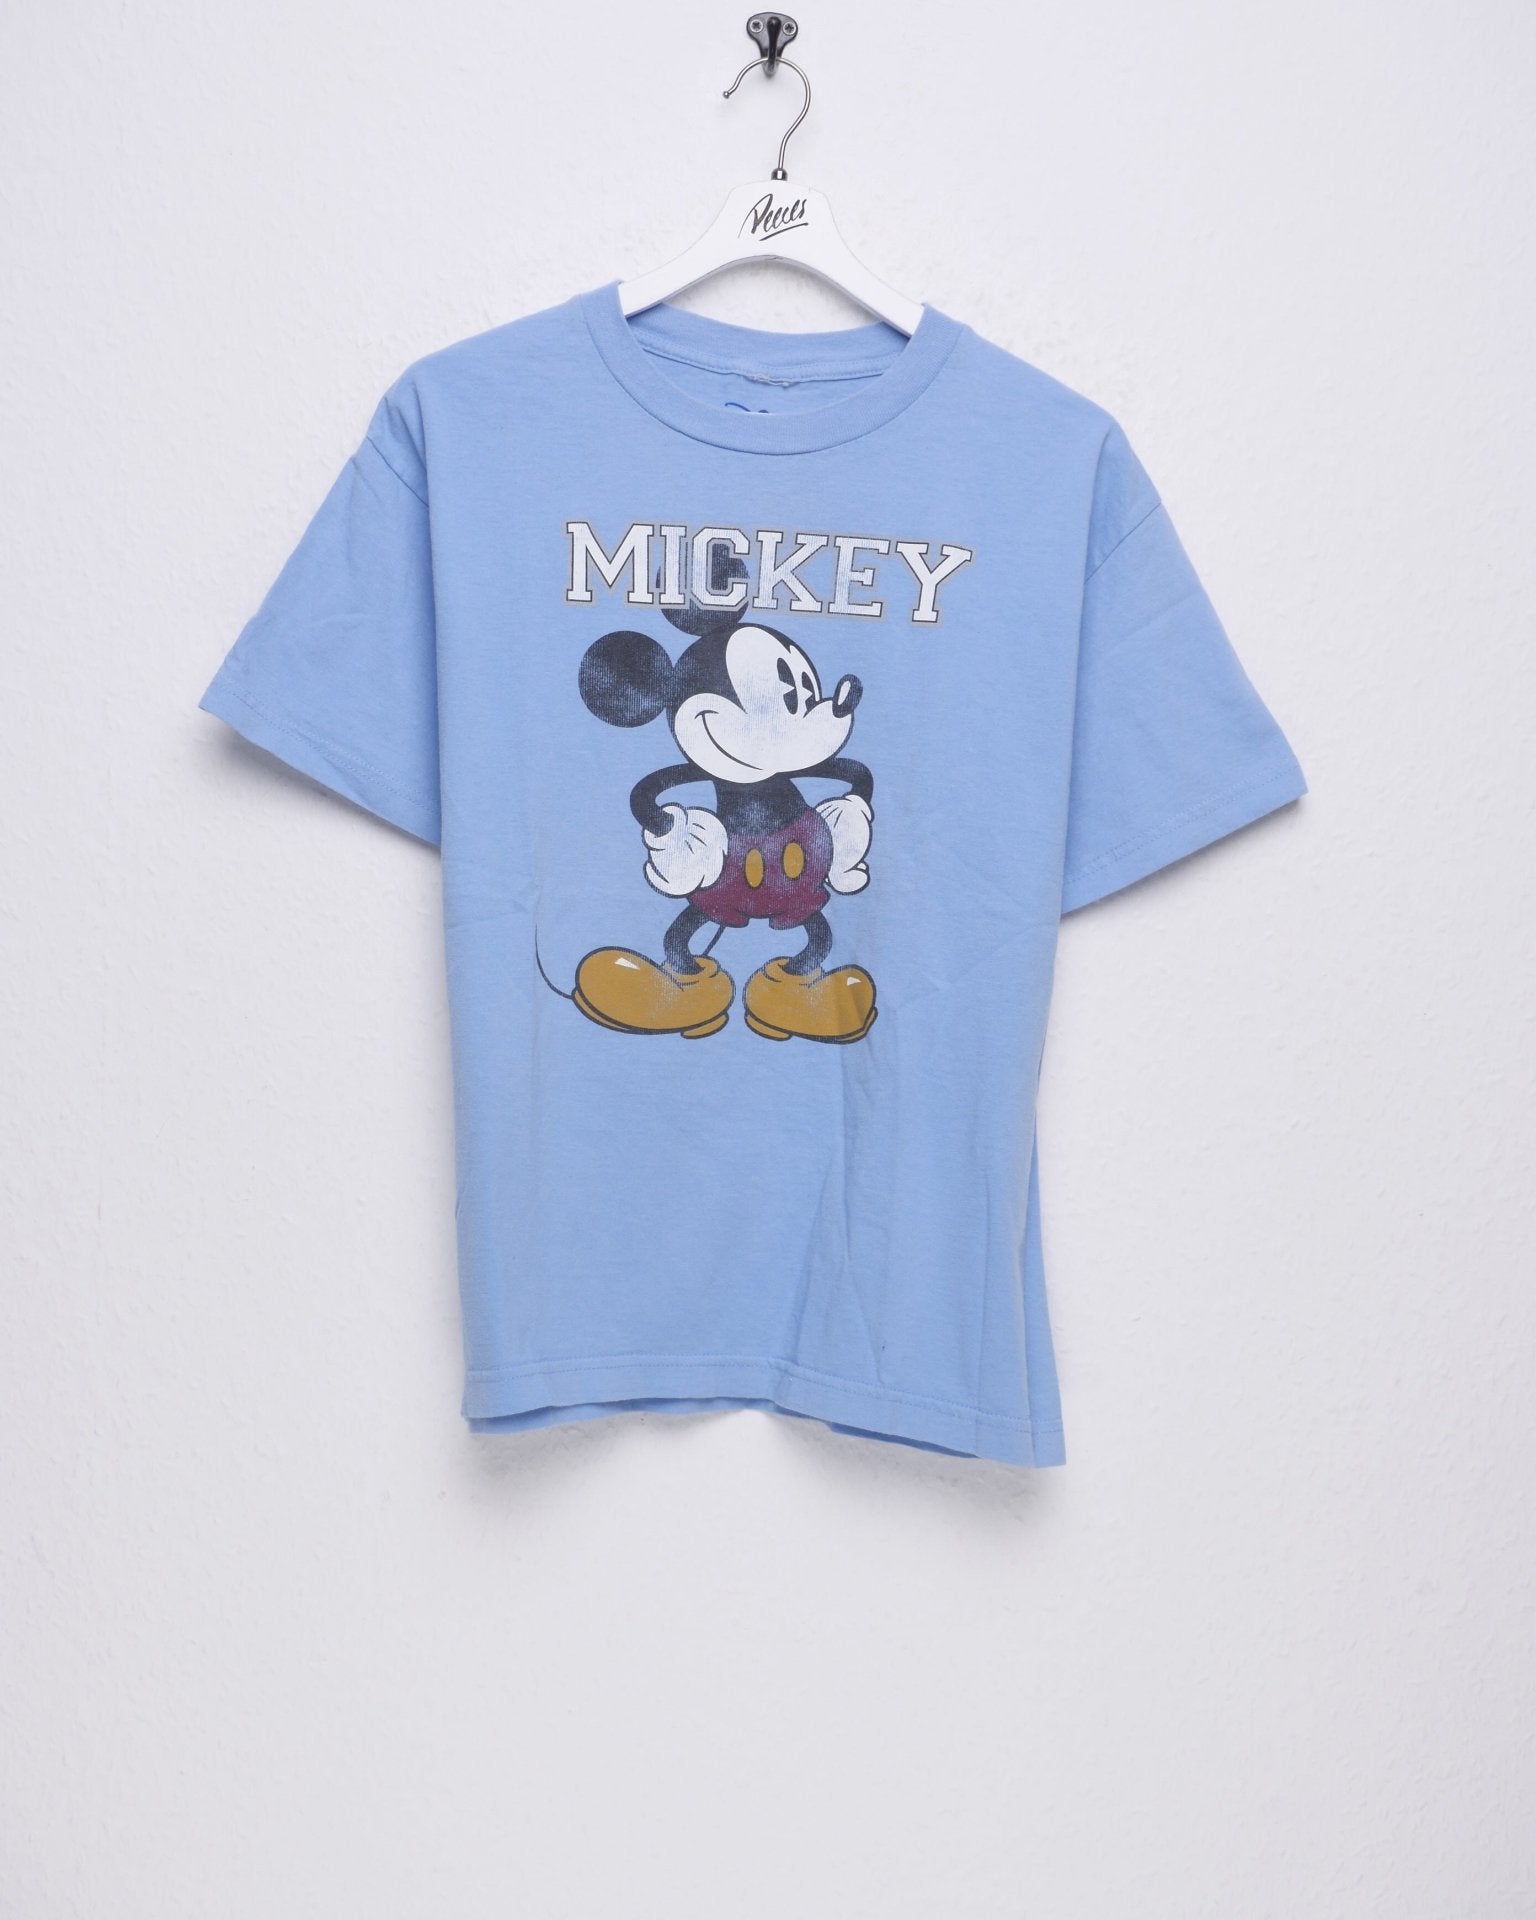 Disney Mickey Mouse printed Graphic babyblue Shirt - Peeces